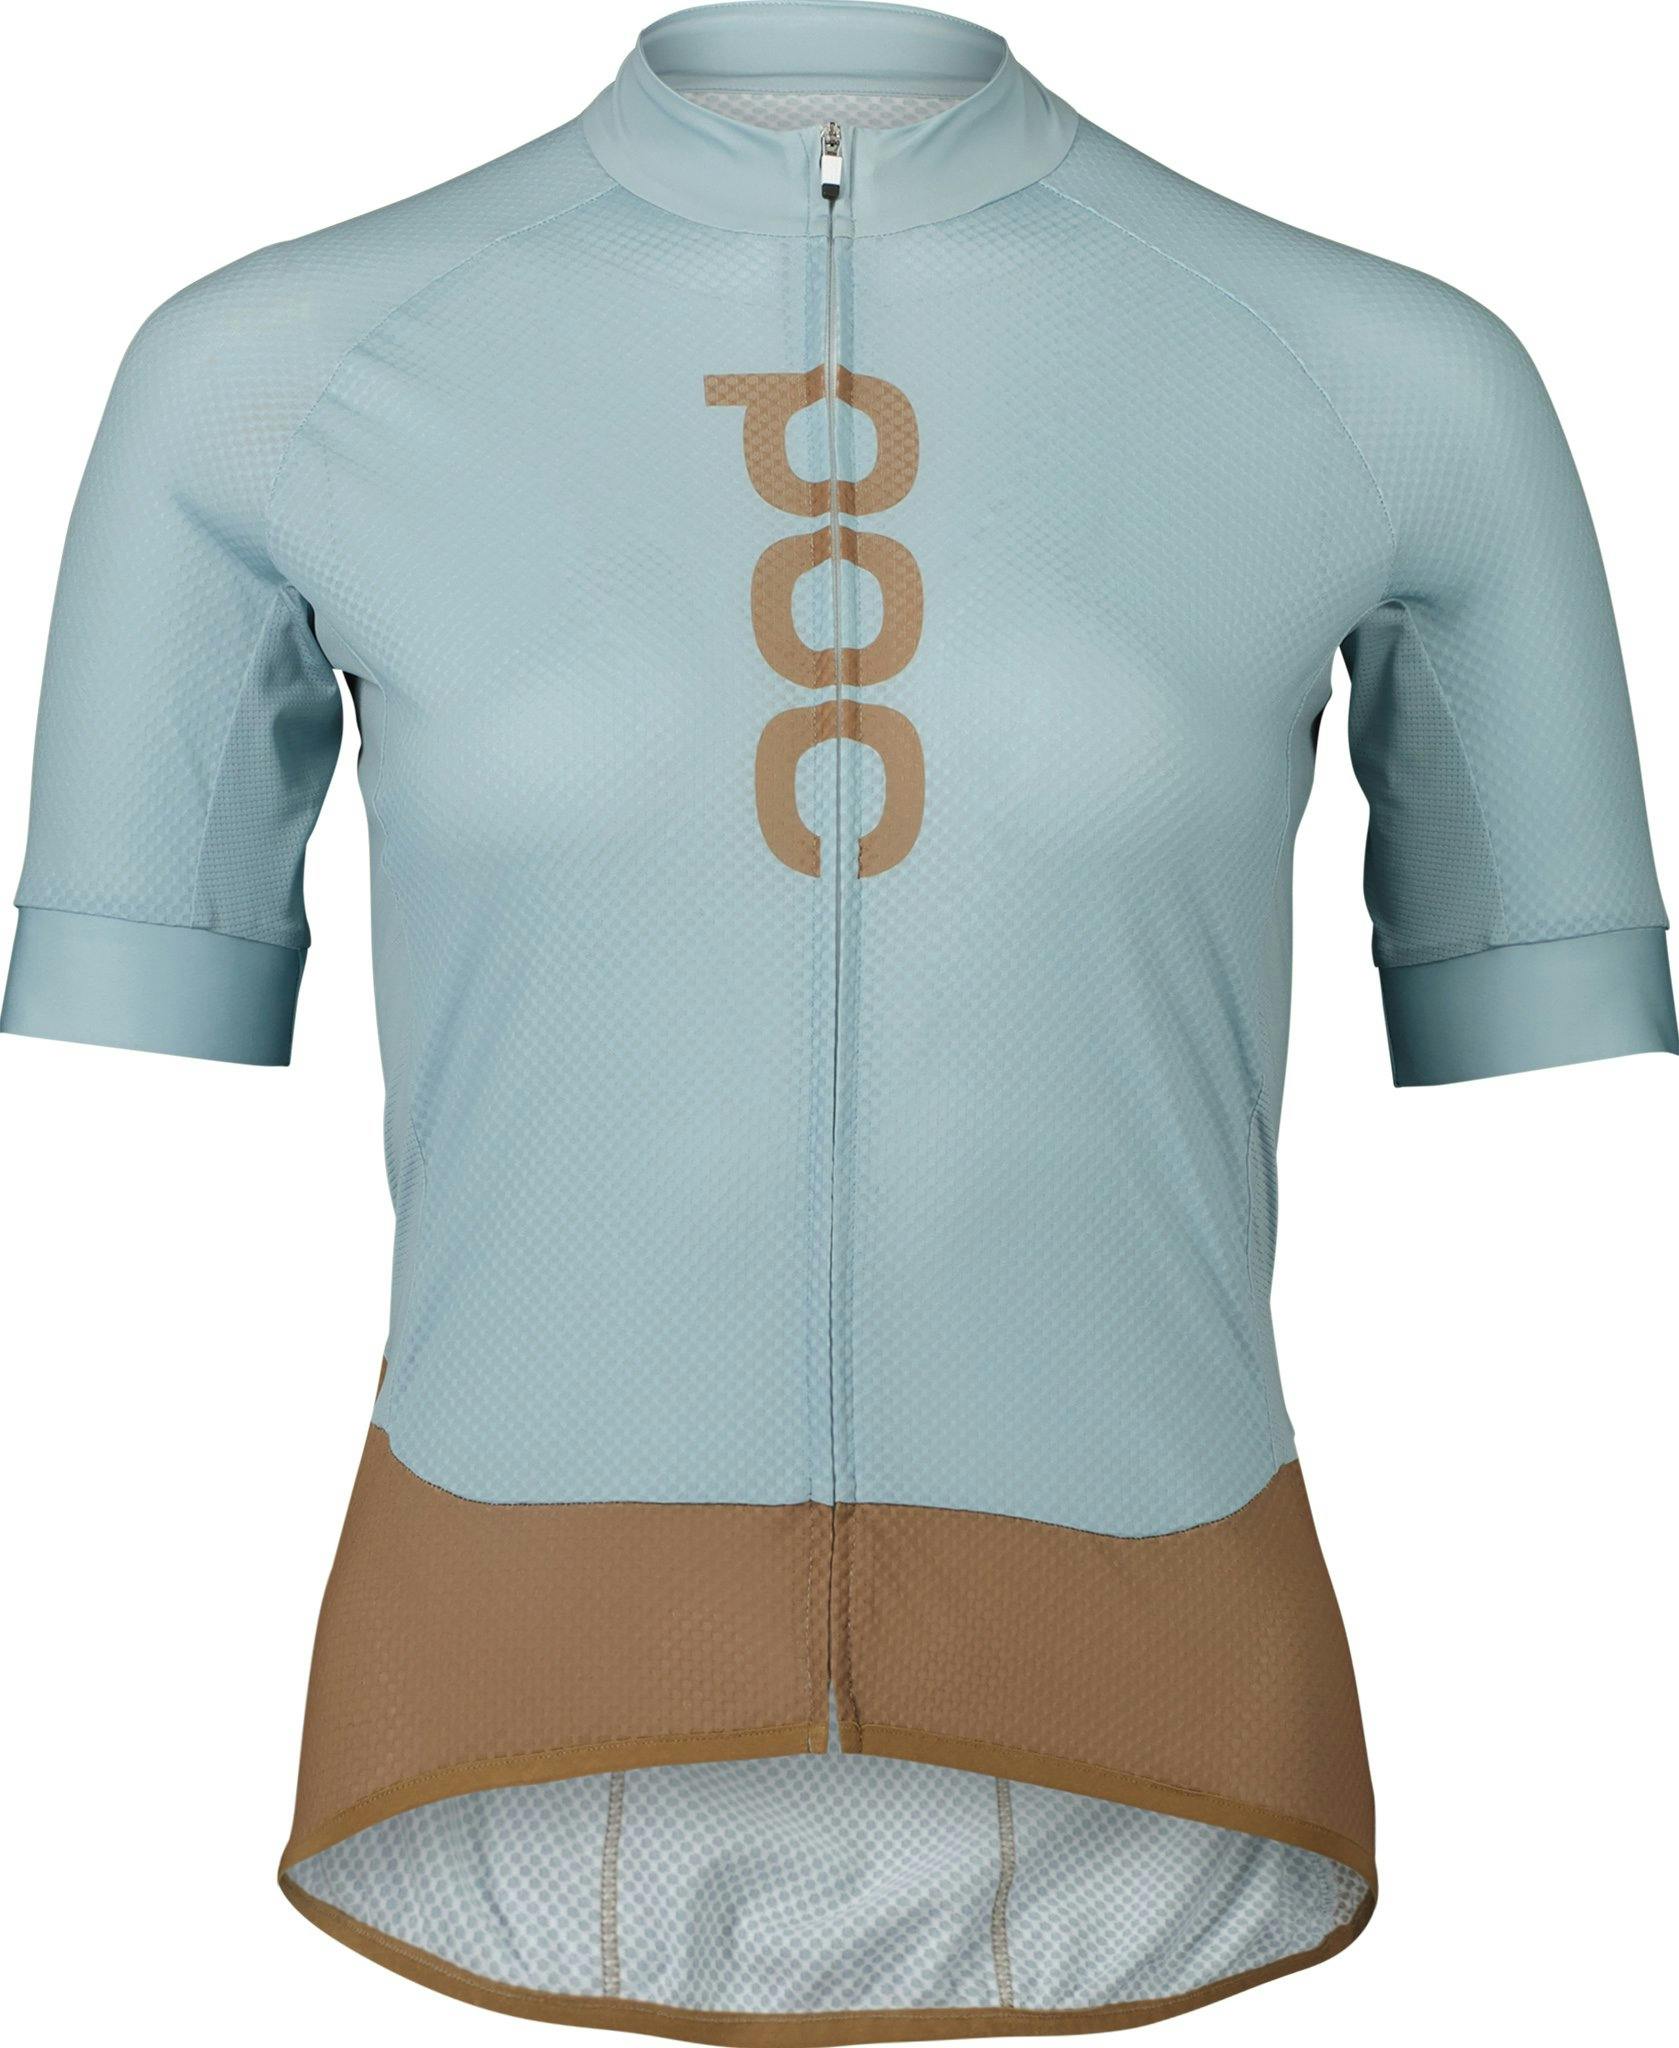 Product image for Essential Road Logo Jersey - Women's